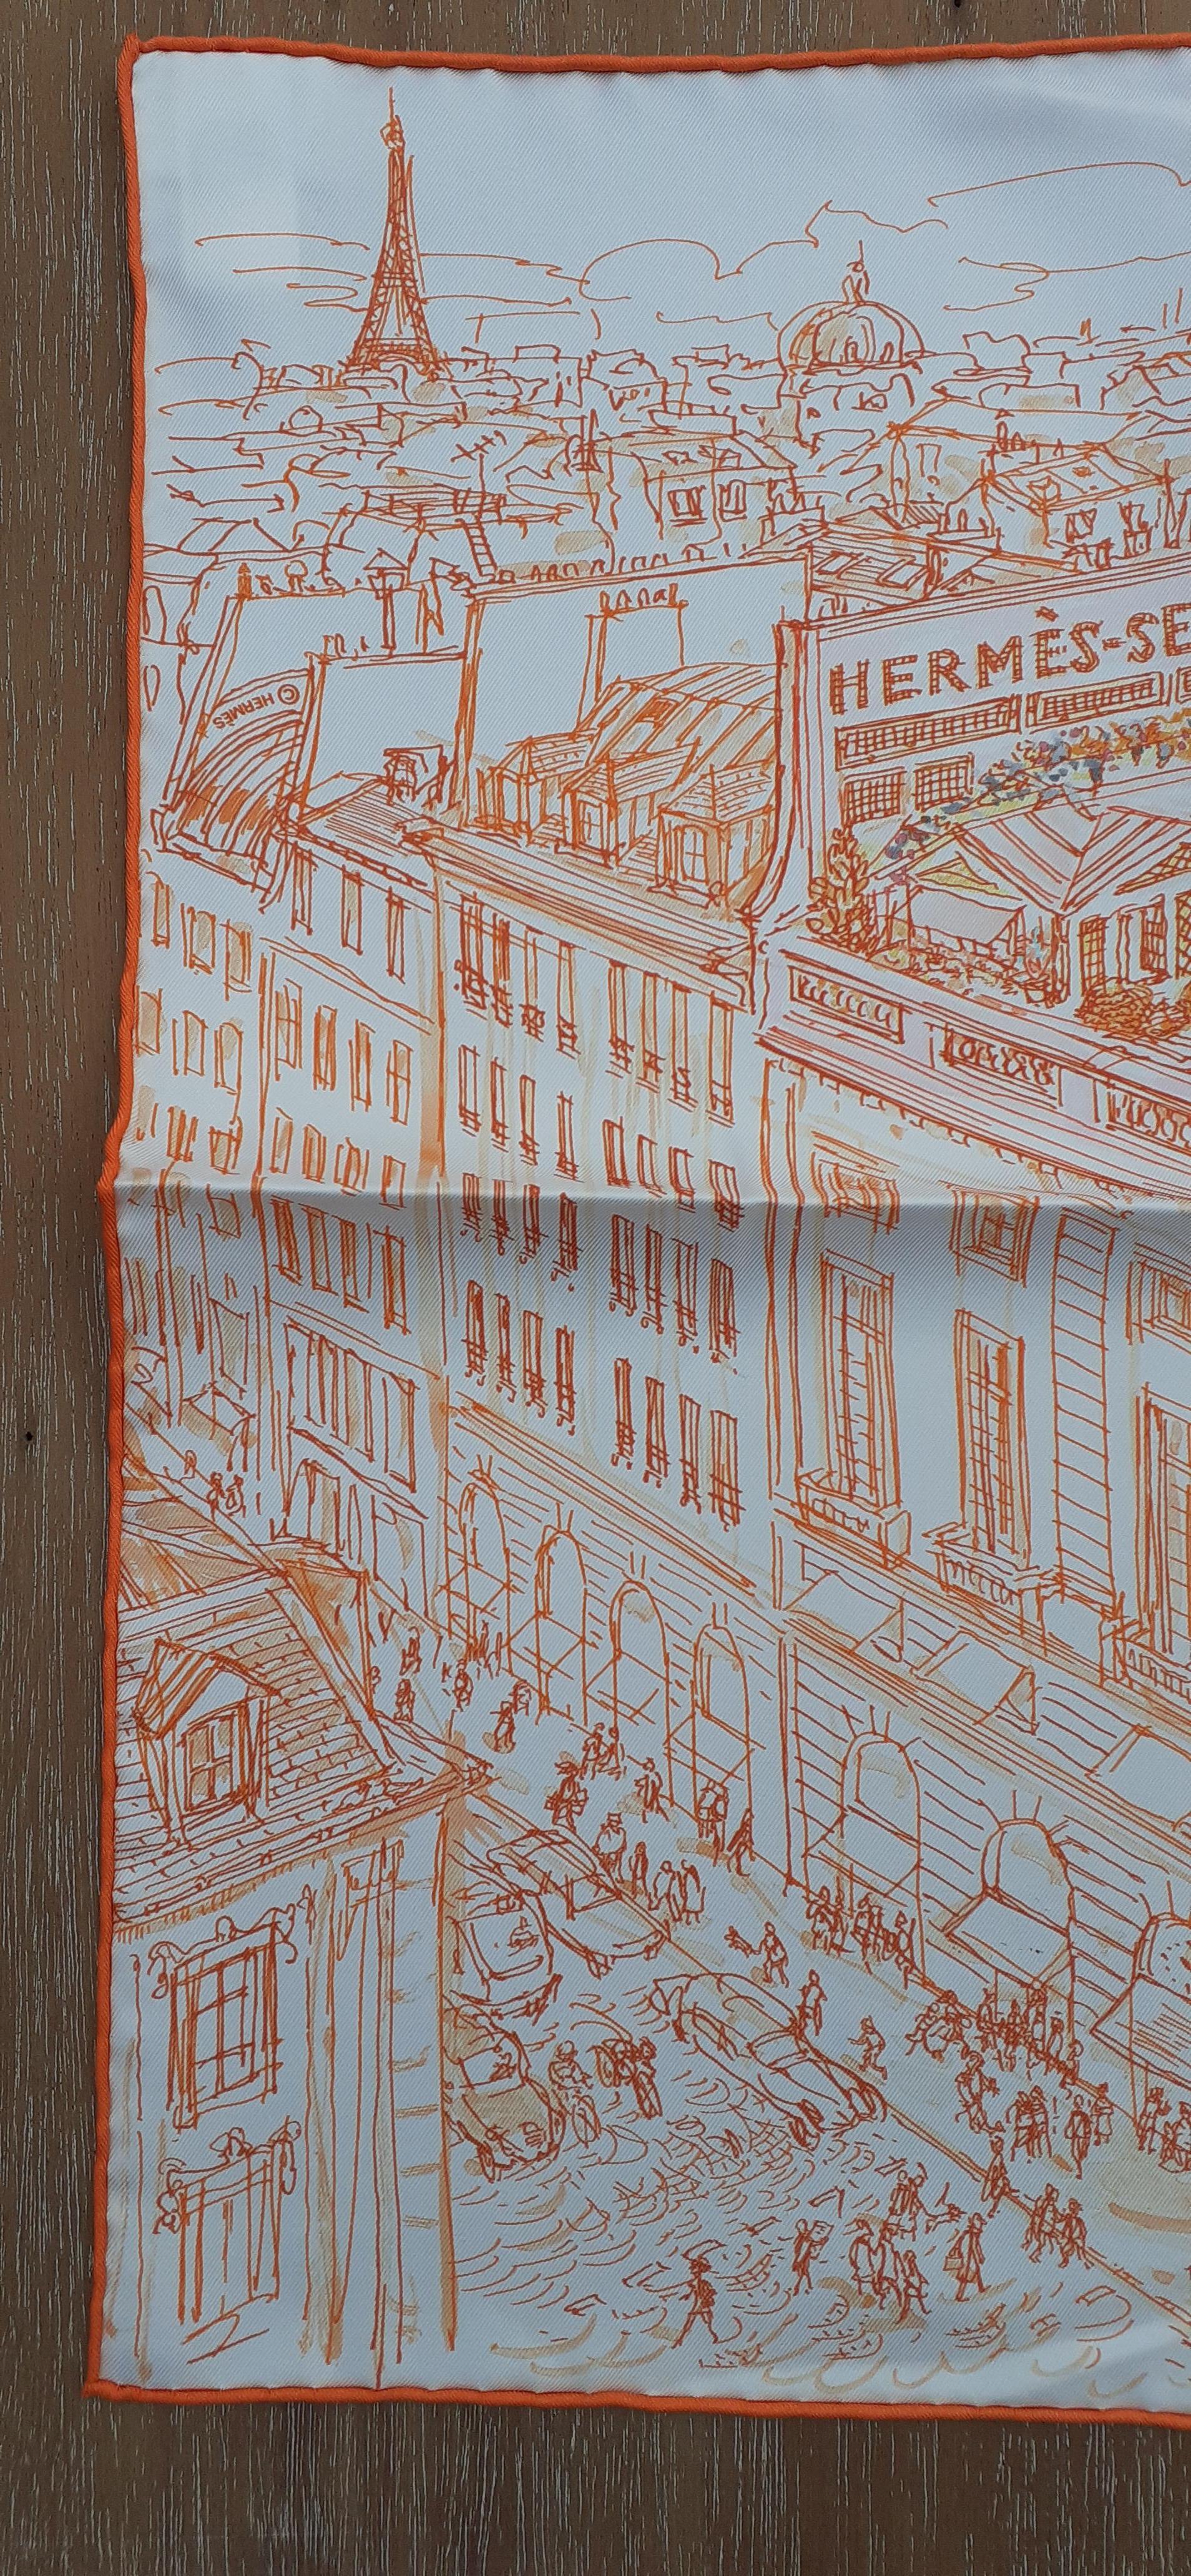 Collectible Gorgeous Authentic Hermès Scarf

Pattern: 